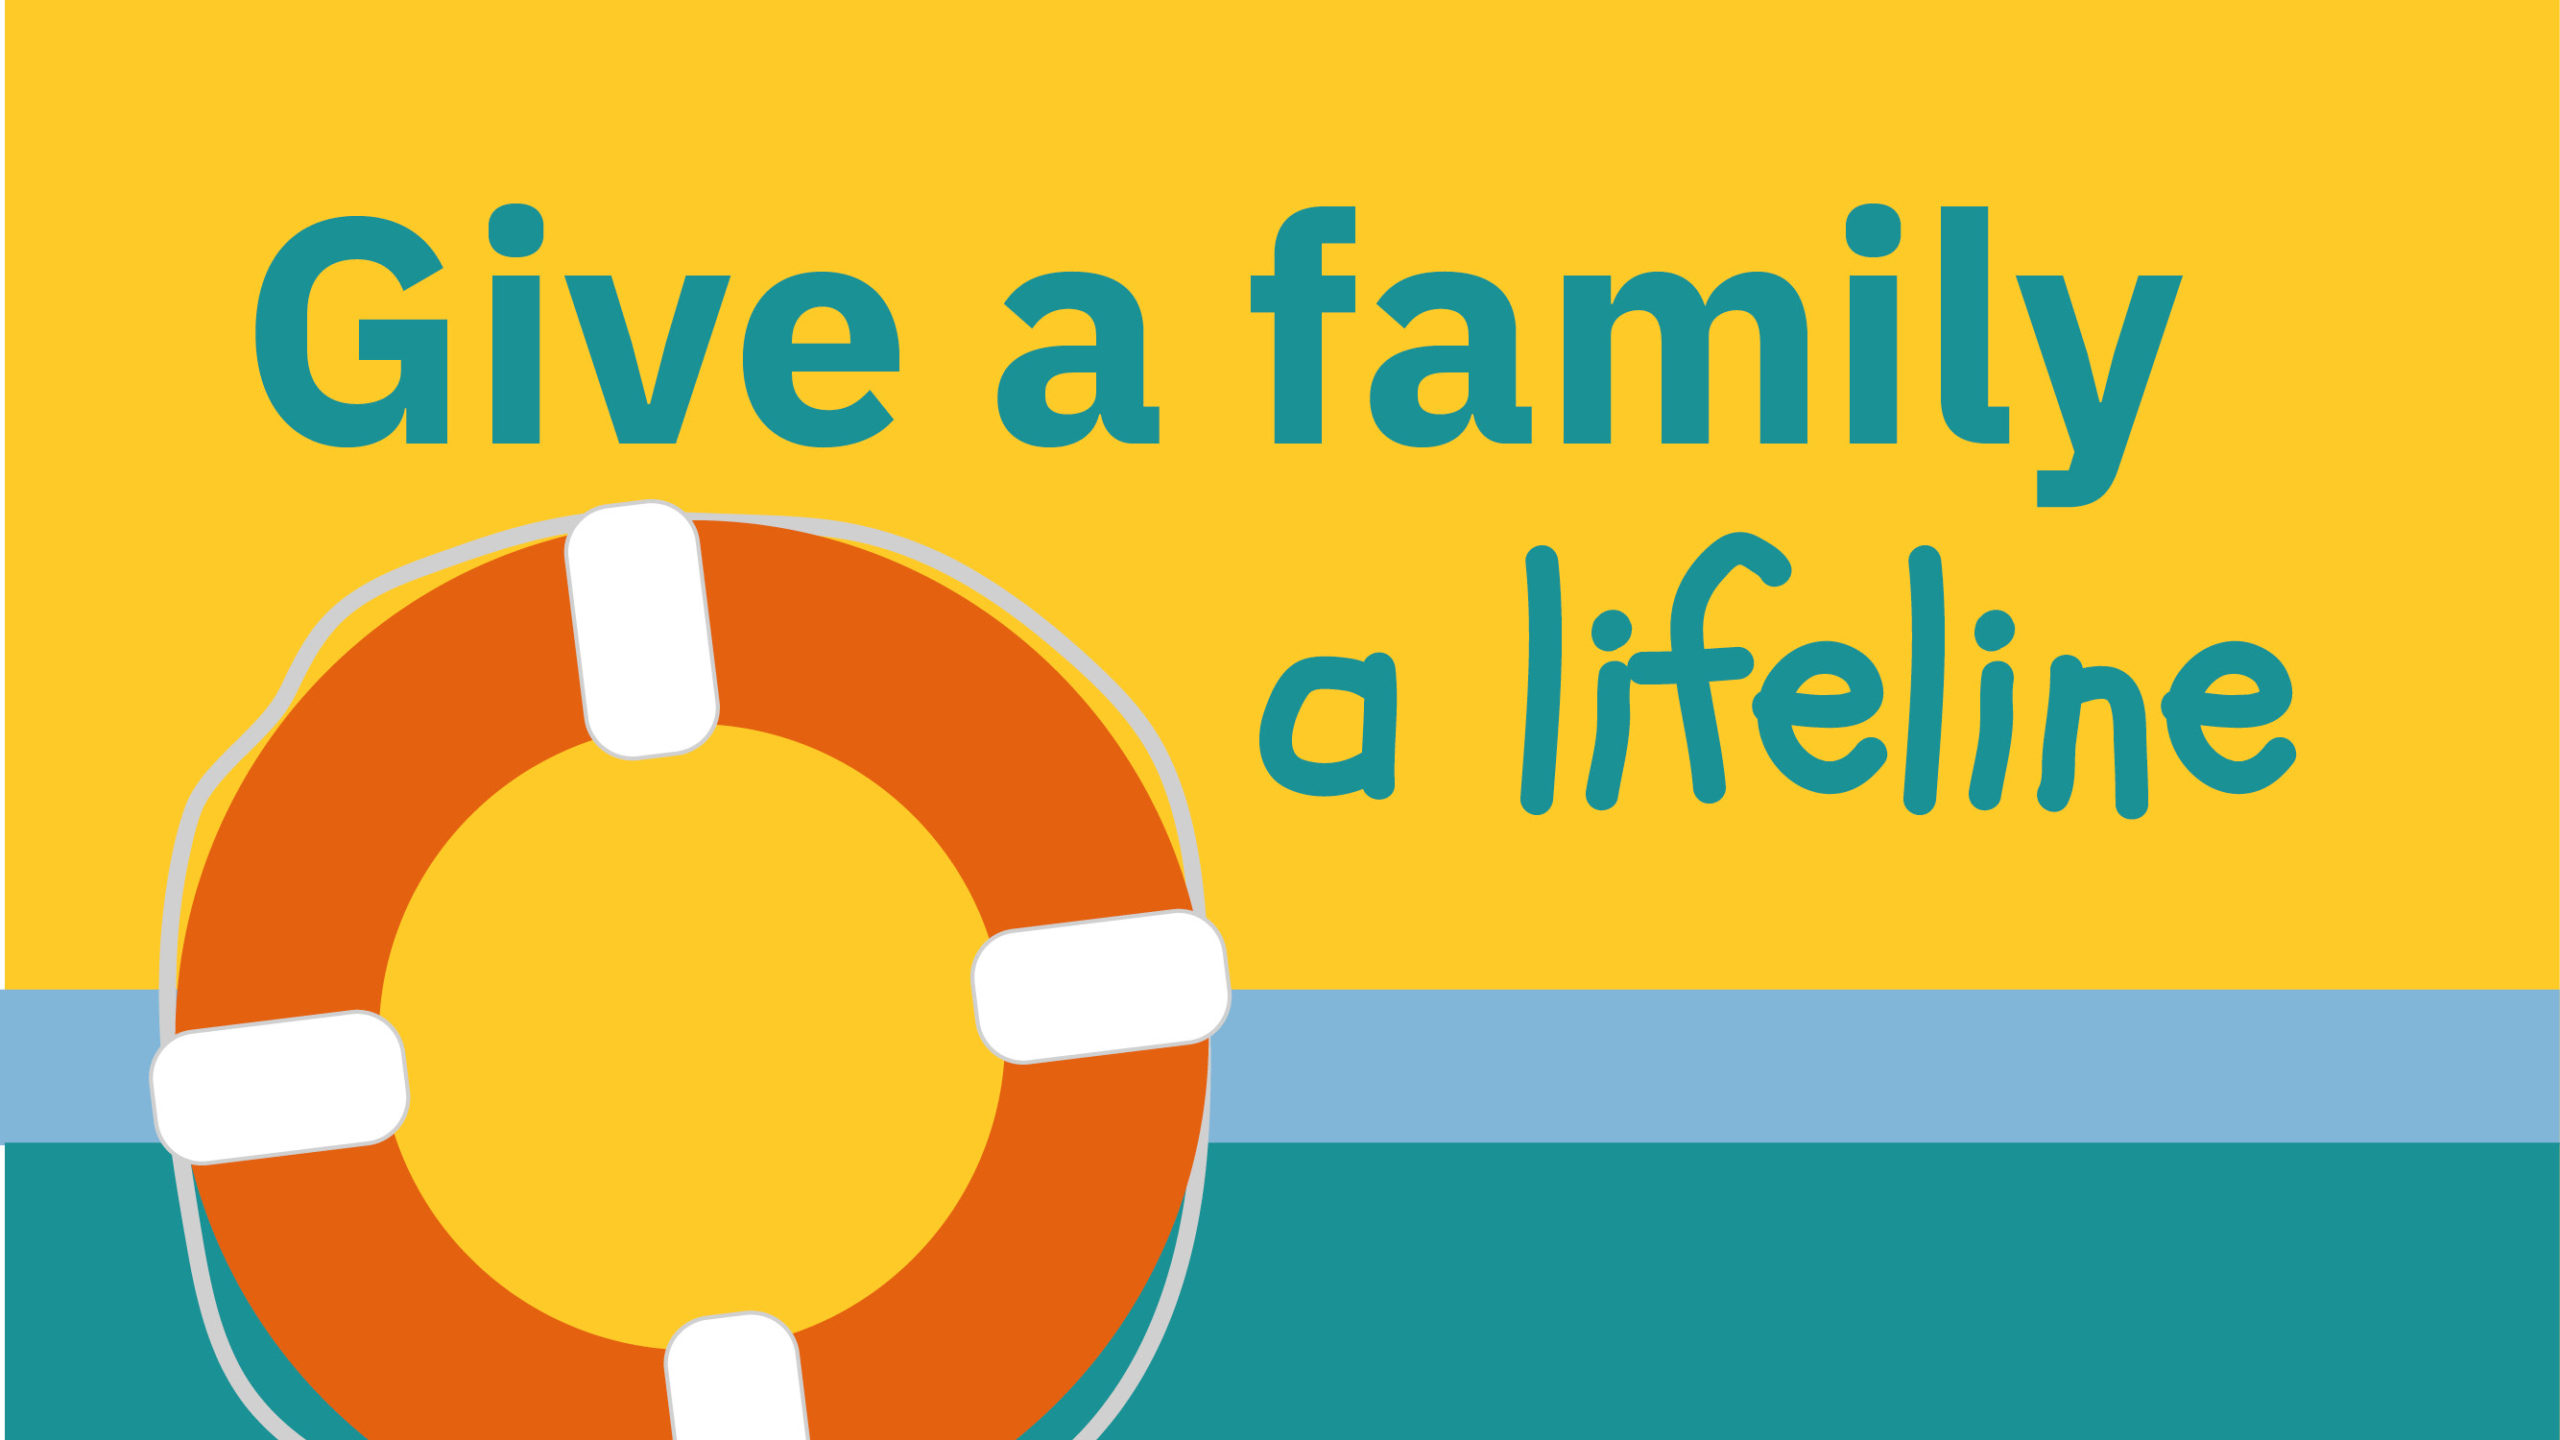 Give a family a lifeline with lifesaving equipment illustration